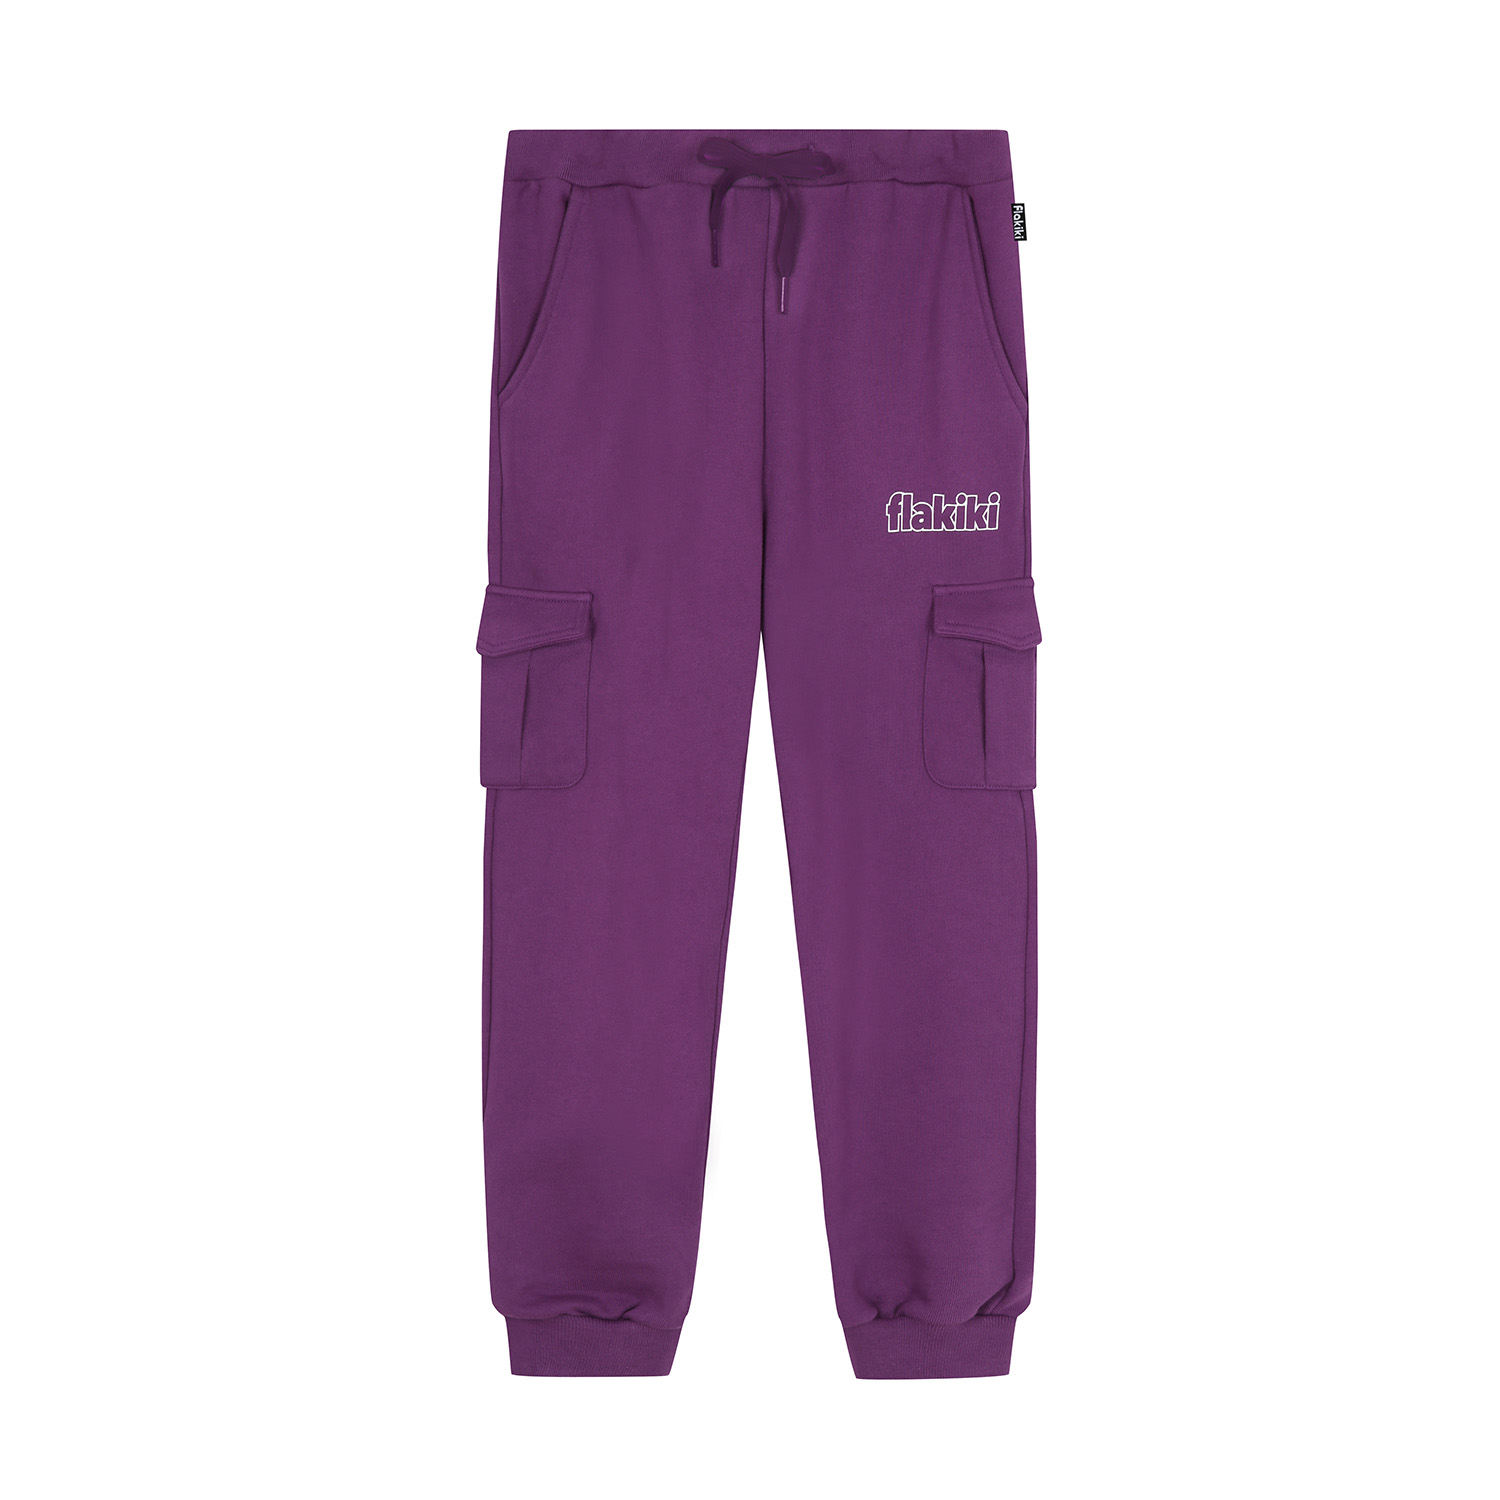 JUST BE ME CARGO PANTS_VIOLET